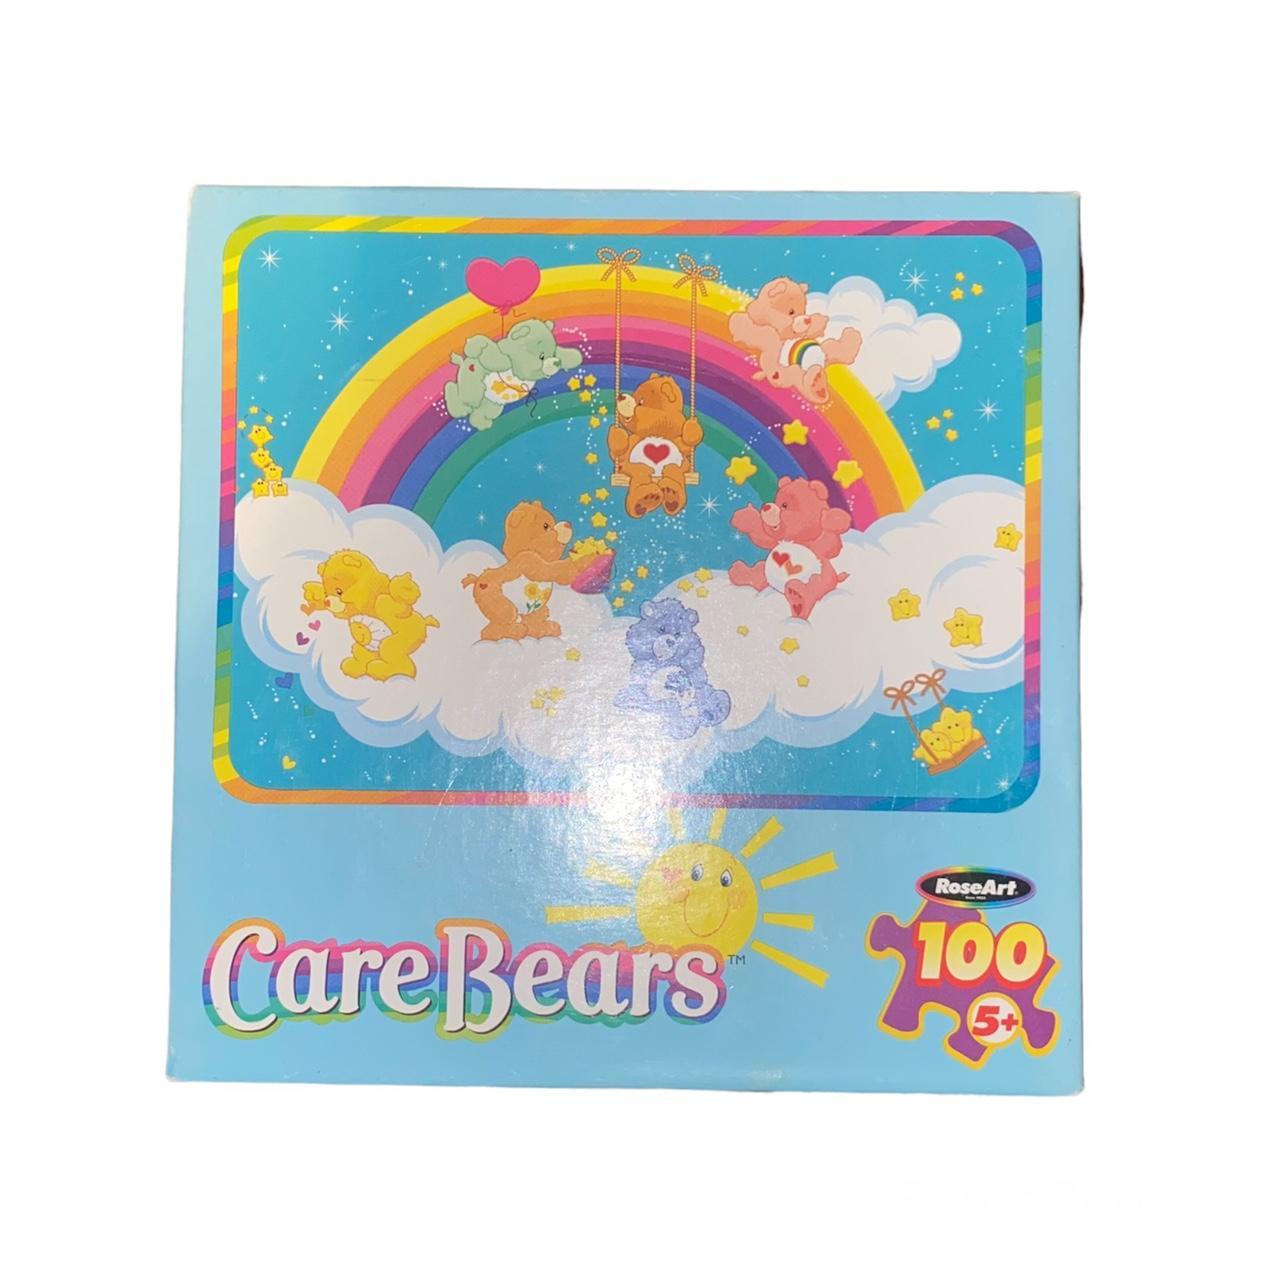 CARE BEARS RAINBOW PUZZLE 😫💕 OMG IM IN LOVE !!! this... - Depop